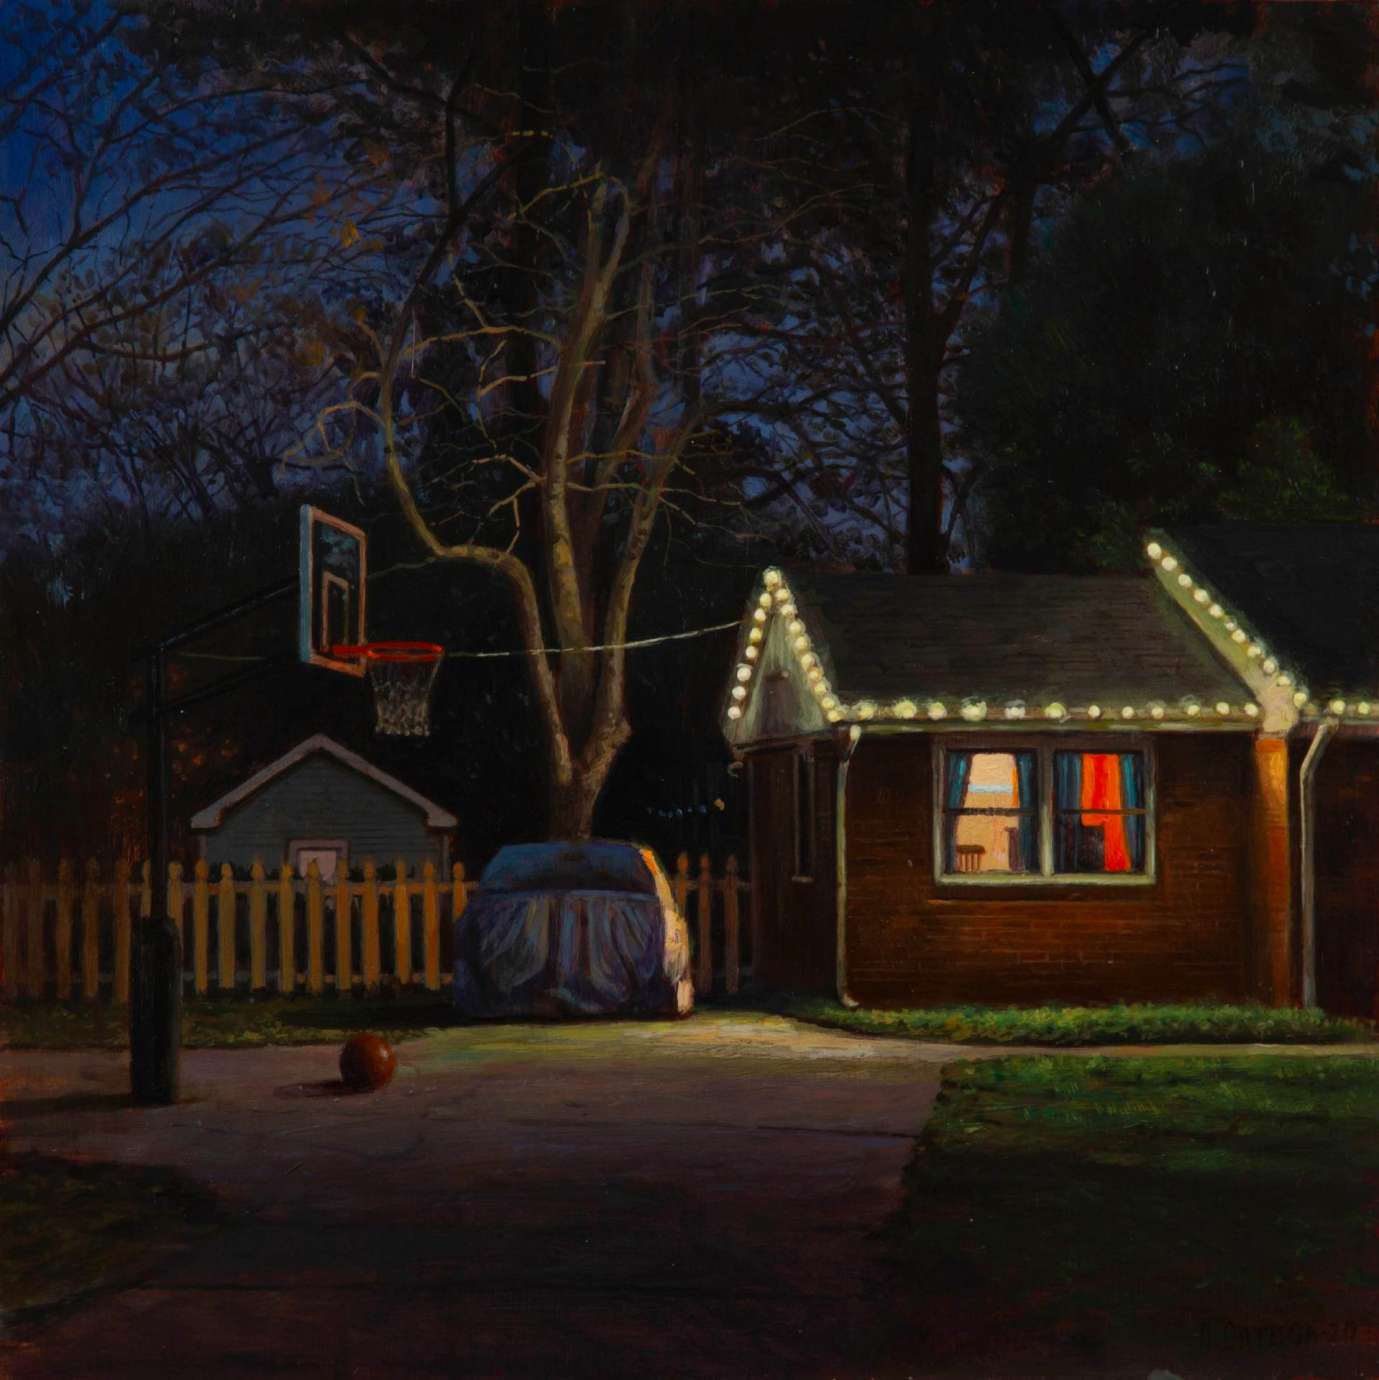 Painting of a house and driveway with basketball hoop at night by artist Alberto Ortega